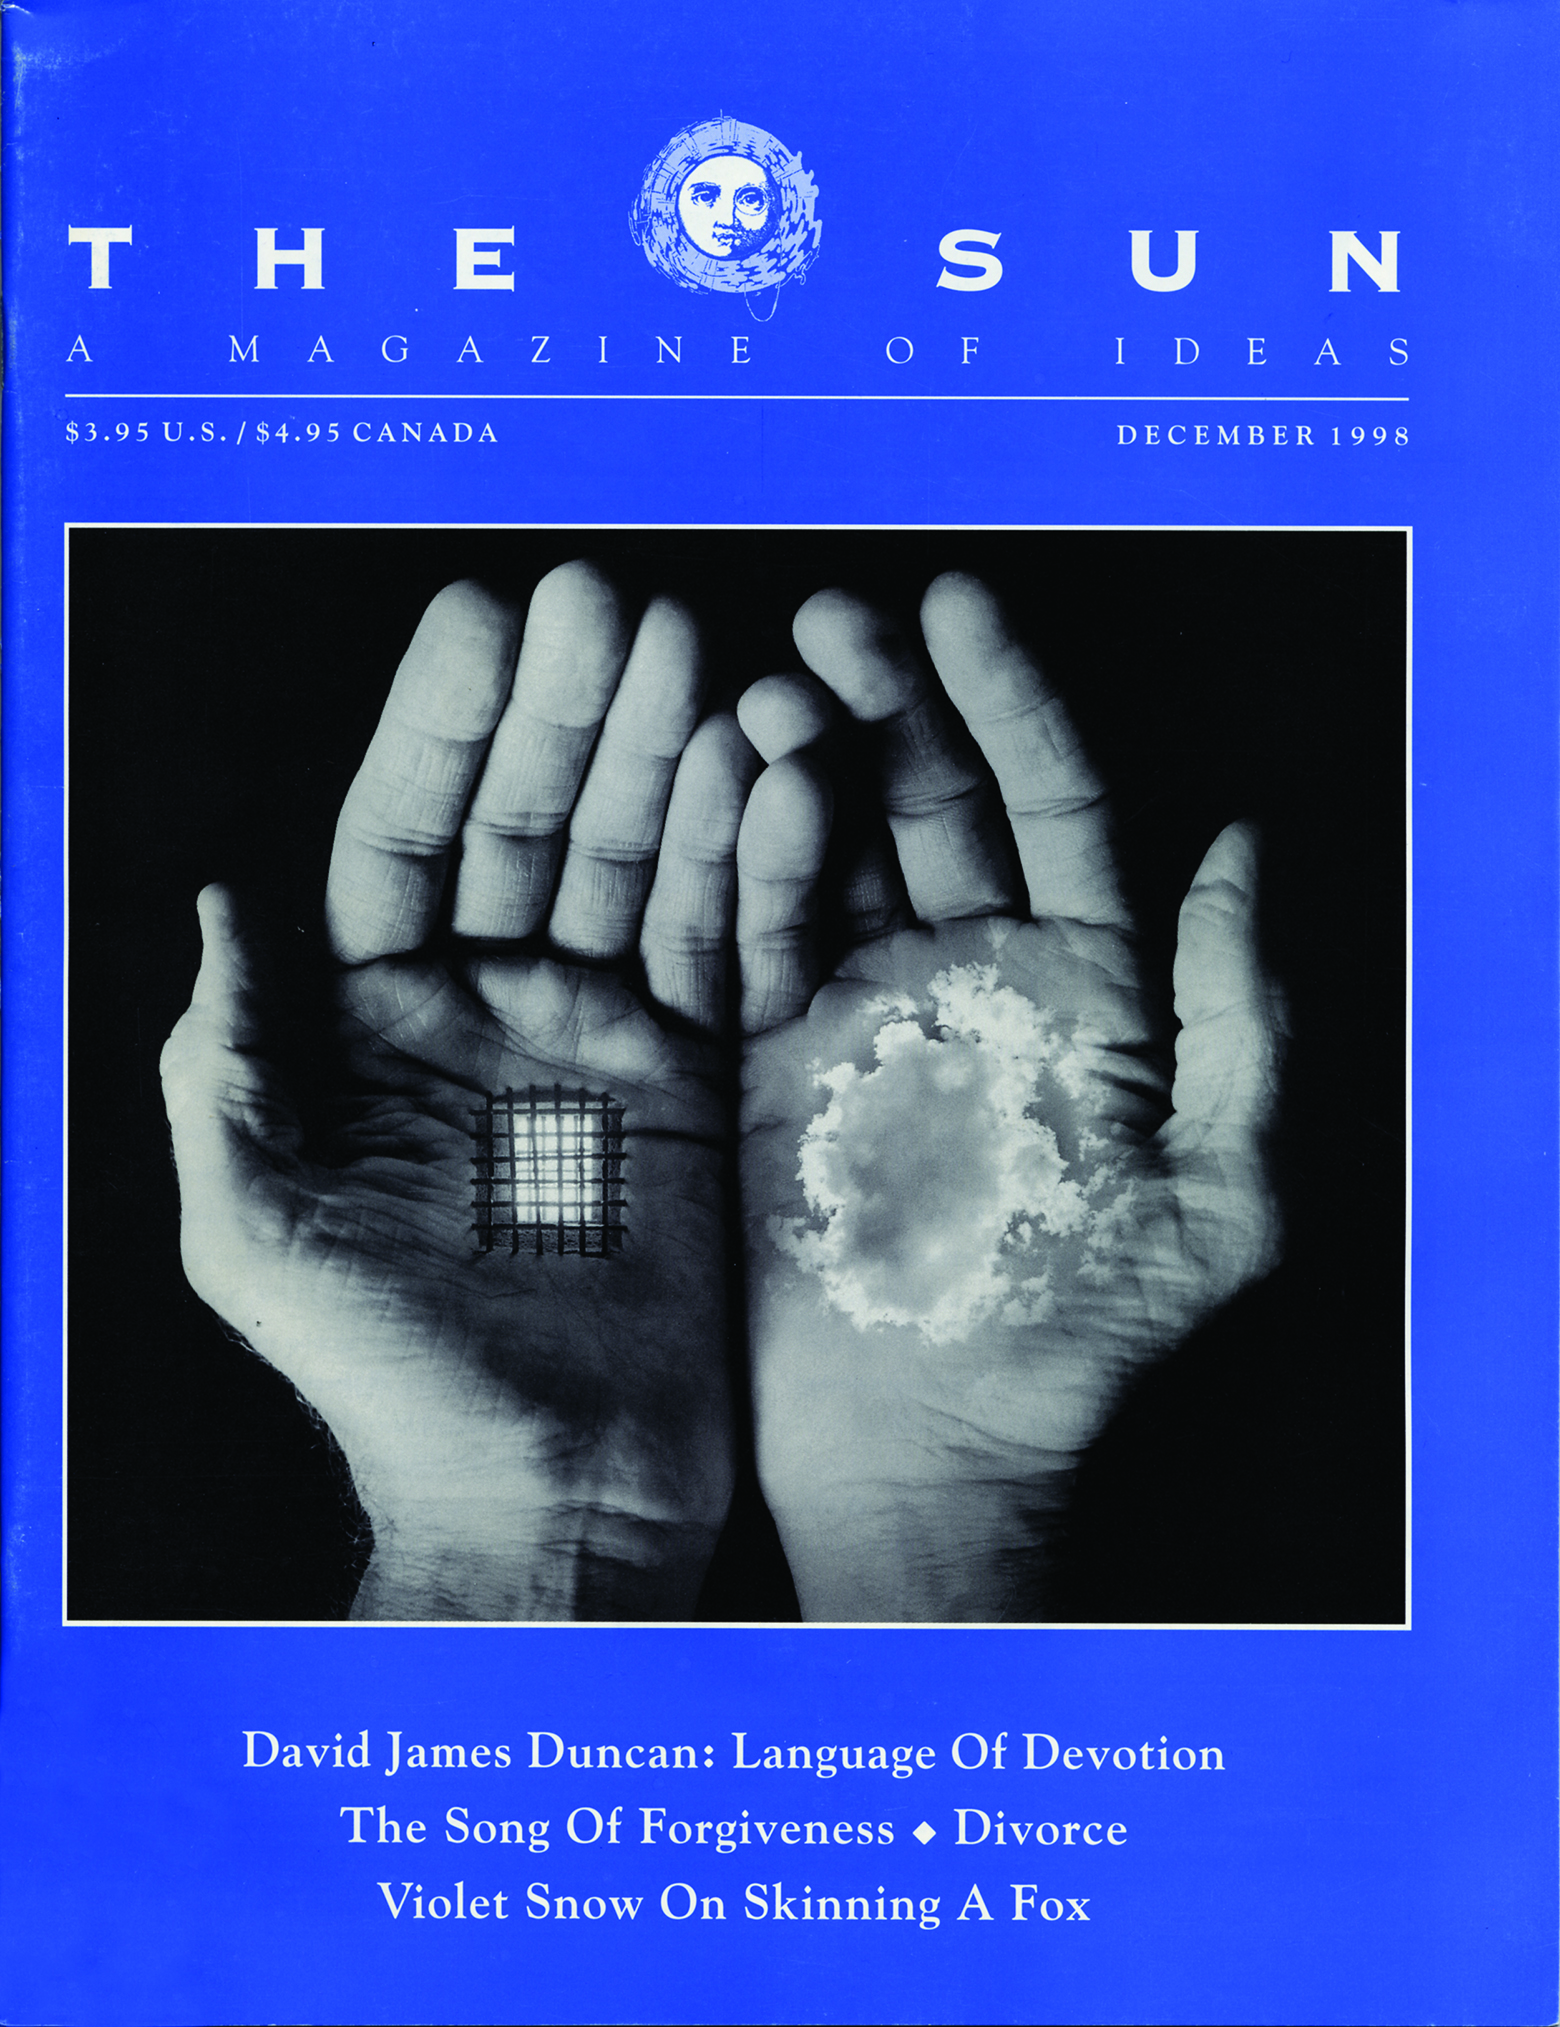 December 1998 cover of The Sun. A photomontage of a pair of open palms: one holds a cloud while the other holds a window with bars over it.